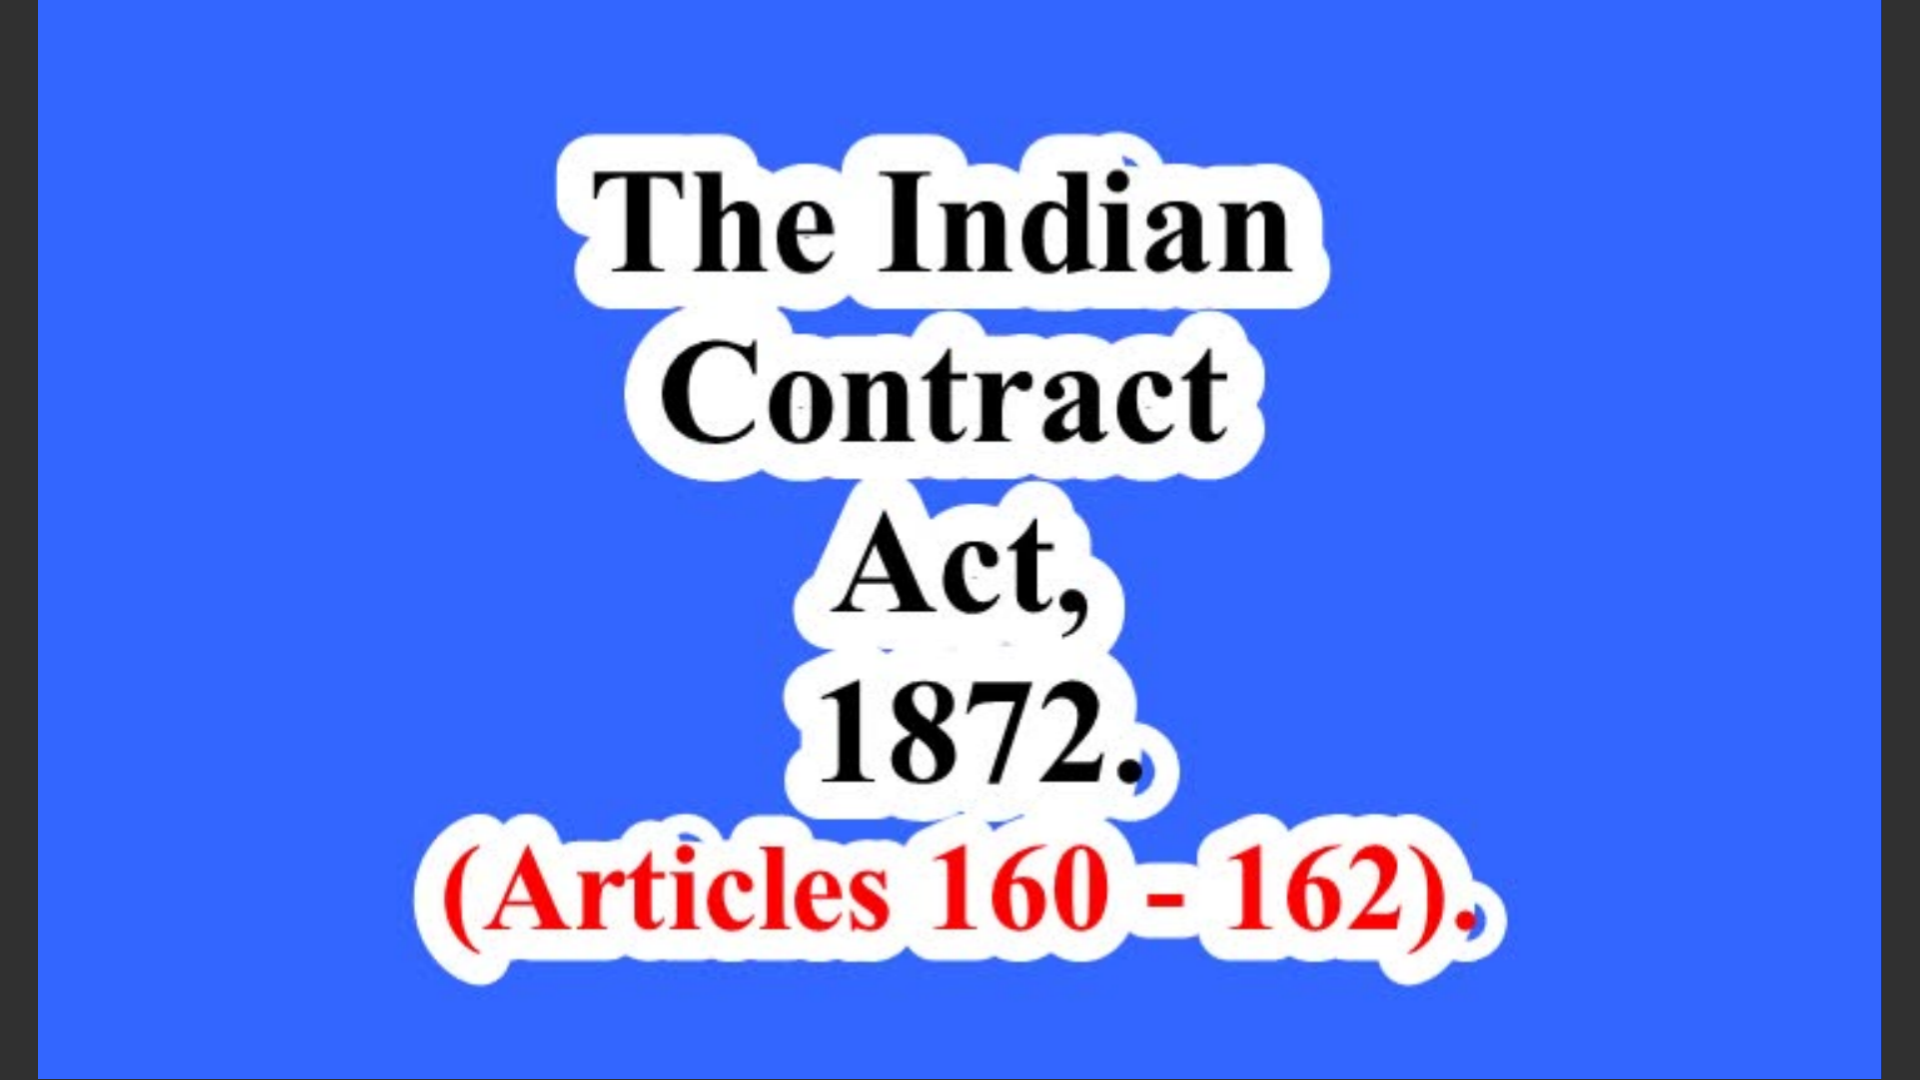 The Indian Contract Act, 1872. (Articles 160 – 162).